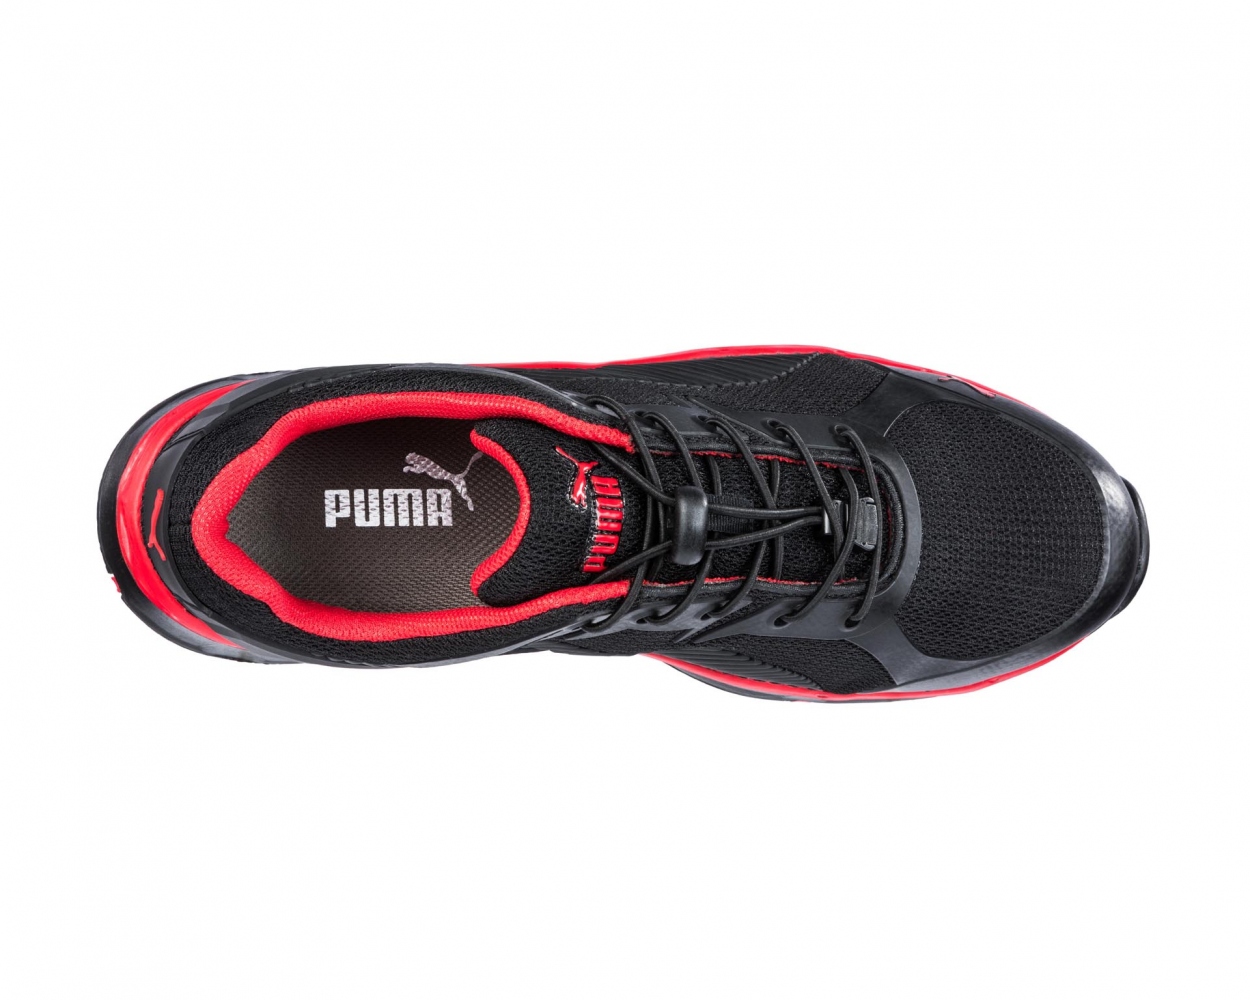 pics/Albatros/Safety Shoes/643890/puma-643890-fuse-motion-2-red-low-210top.jpg